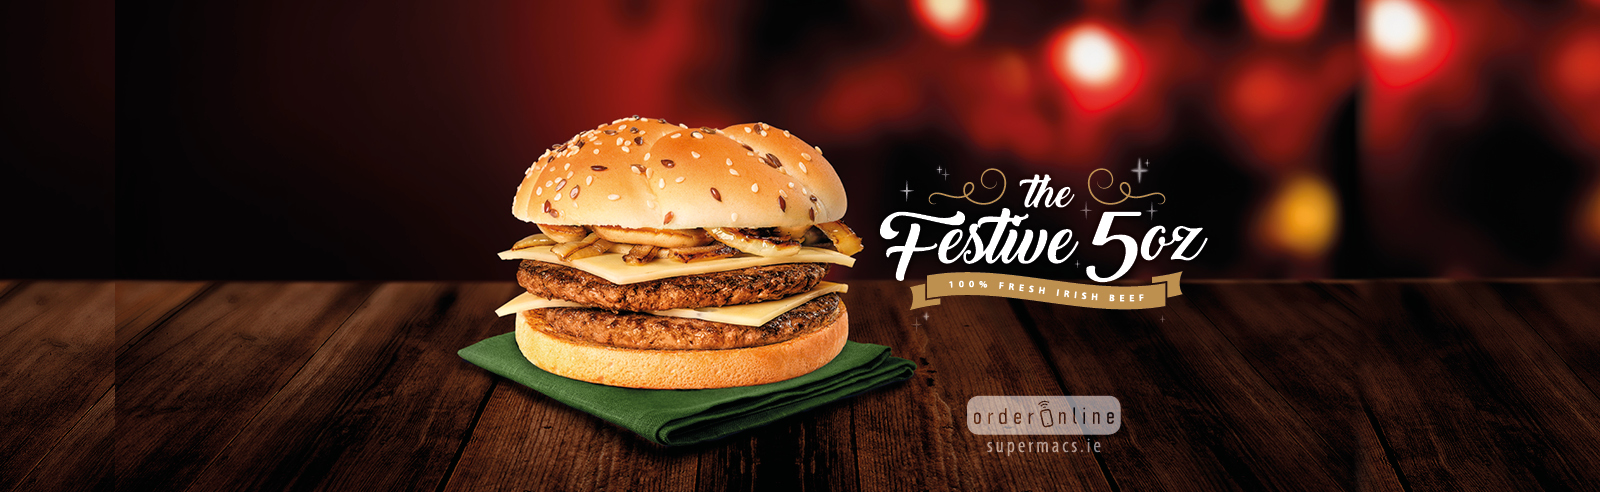 The Supermac’s Festive 5oz is BACK!!!!!